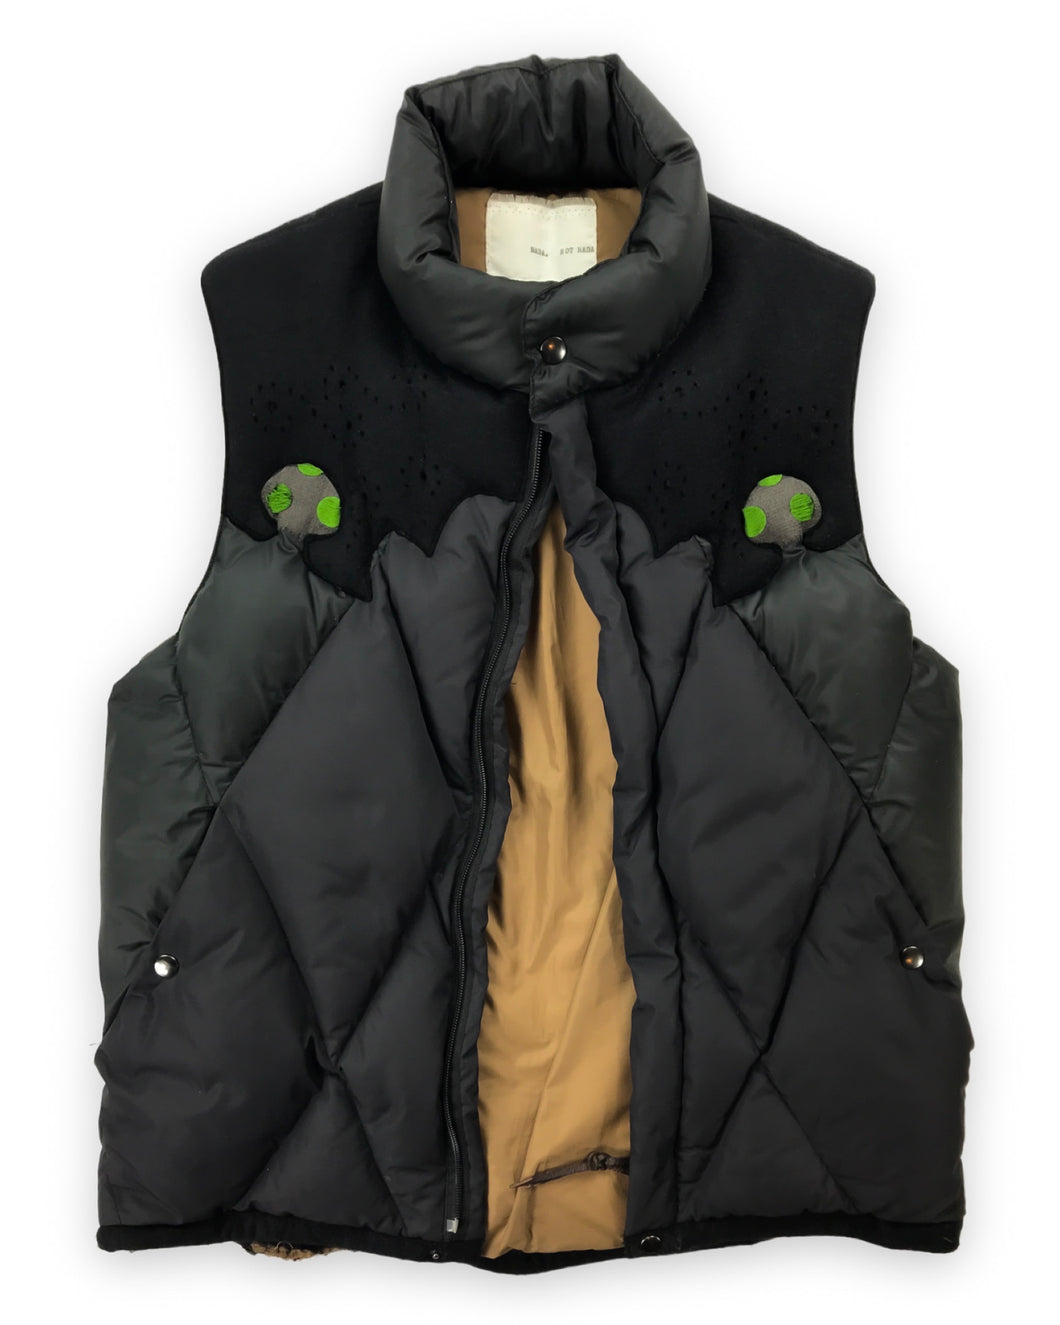 NADA. NOT NADA Embroidered Mushroom Goose Down Vest (AW2013)(Fits M-L)